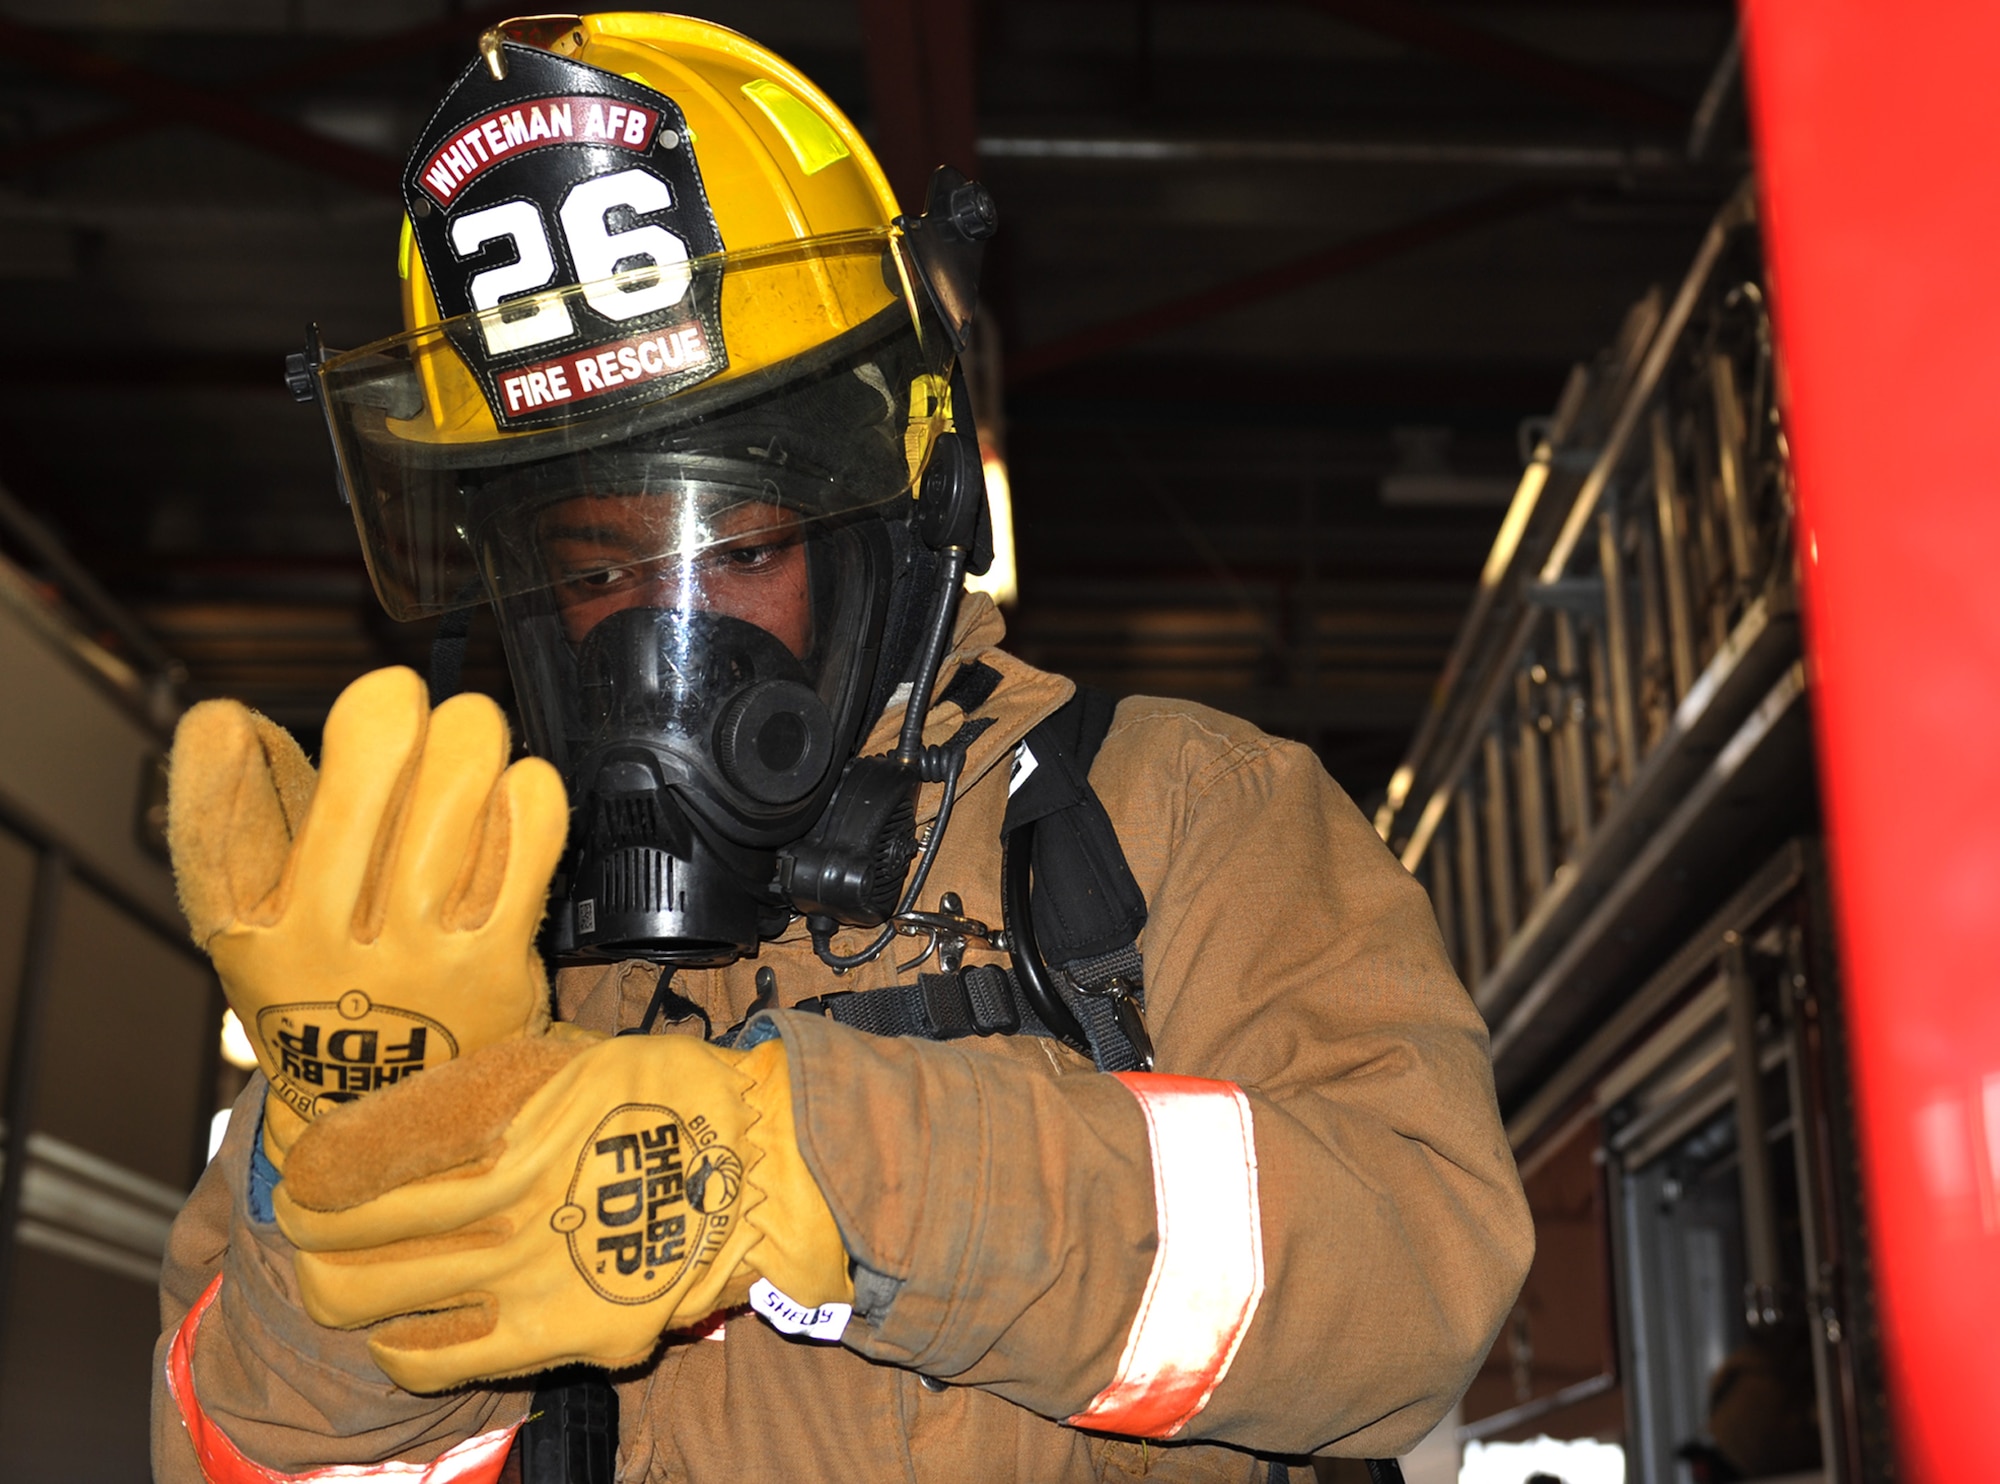 Airman 1st Class Cory Barrett, Team Whiteman firefighter, suits up during a bunker exercise drill Dec. 7 at Whiteman Air Force Base, Mo. Airmen from Whiteman AFB Fire Emergency Services works in two separate shifts to keep the station manned and mission ready 24/7, 365 days a year. (U.S. Air Force photo/Heidi Hunt) (Released)